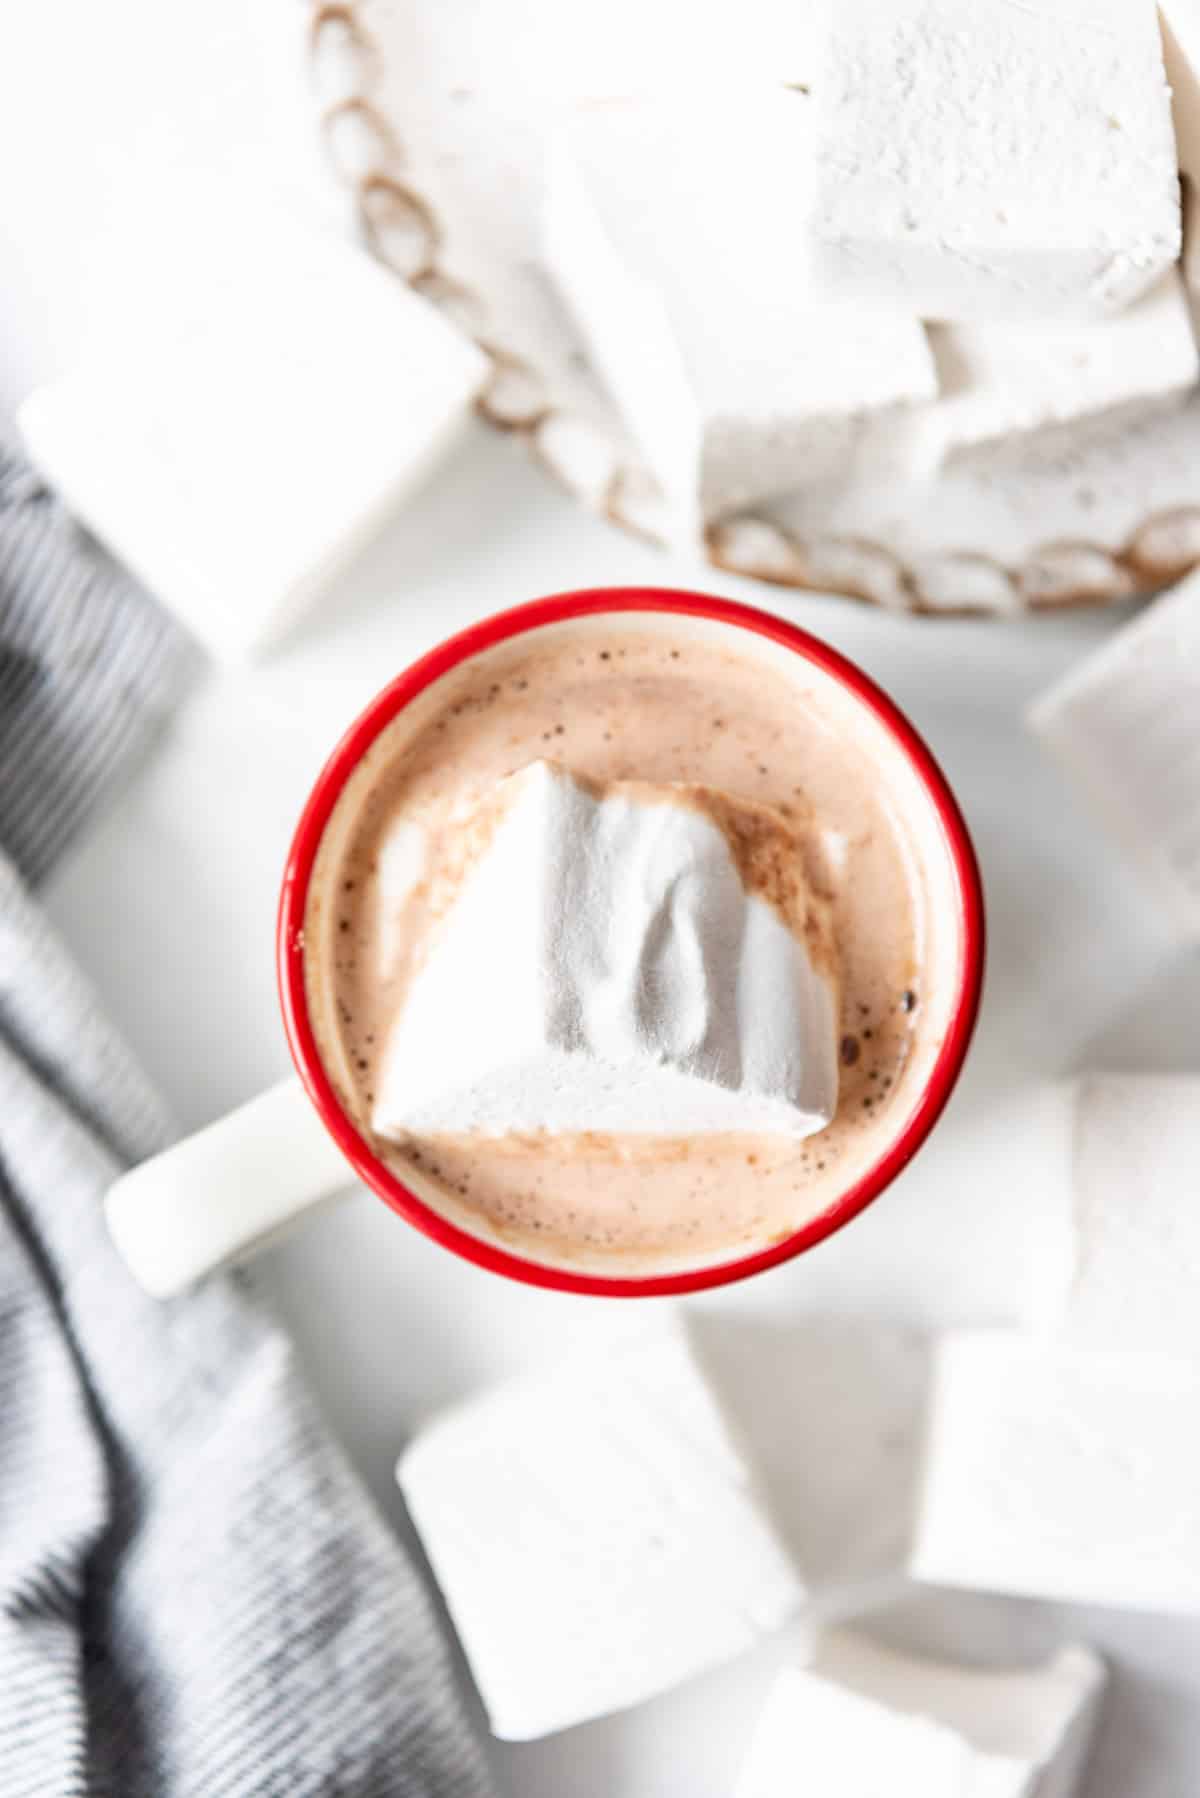 A close view of a marshmallow topping a mug of homemade hot cocoa.